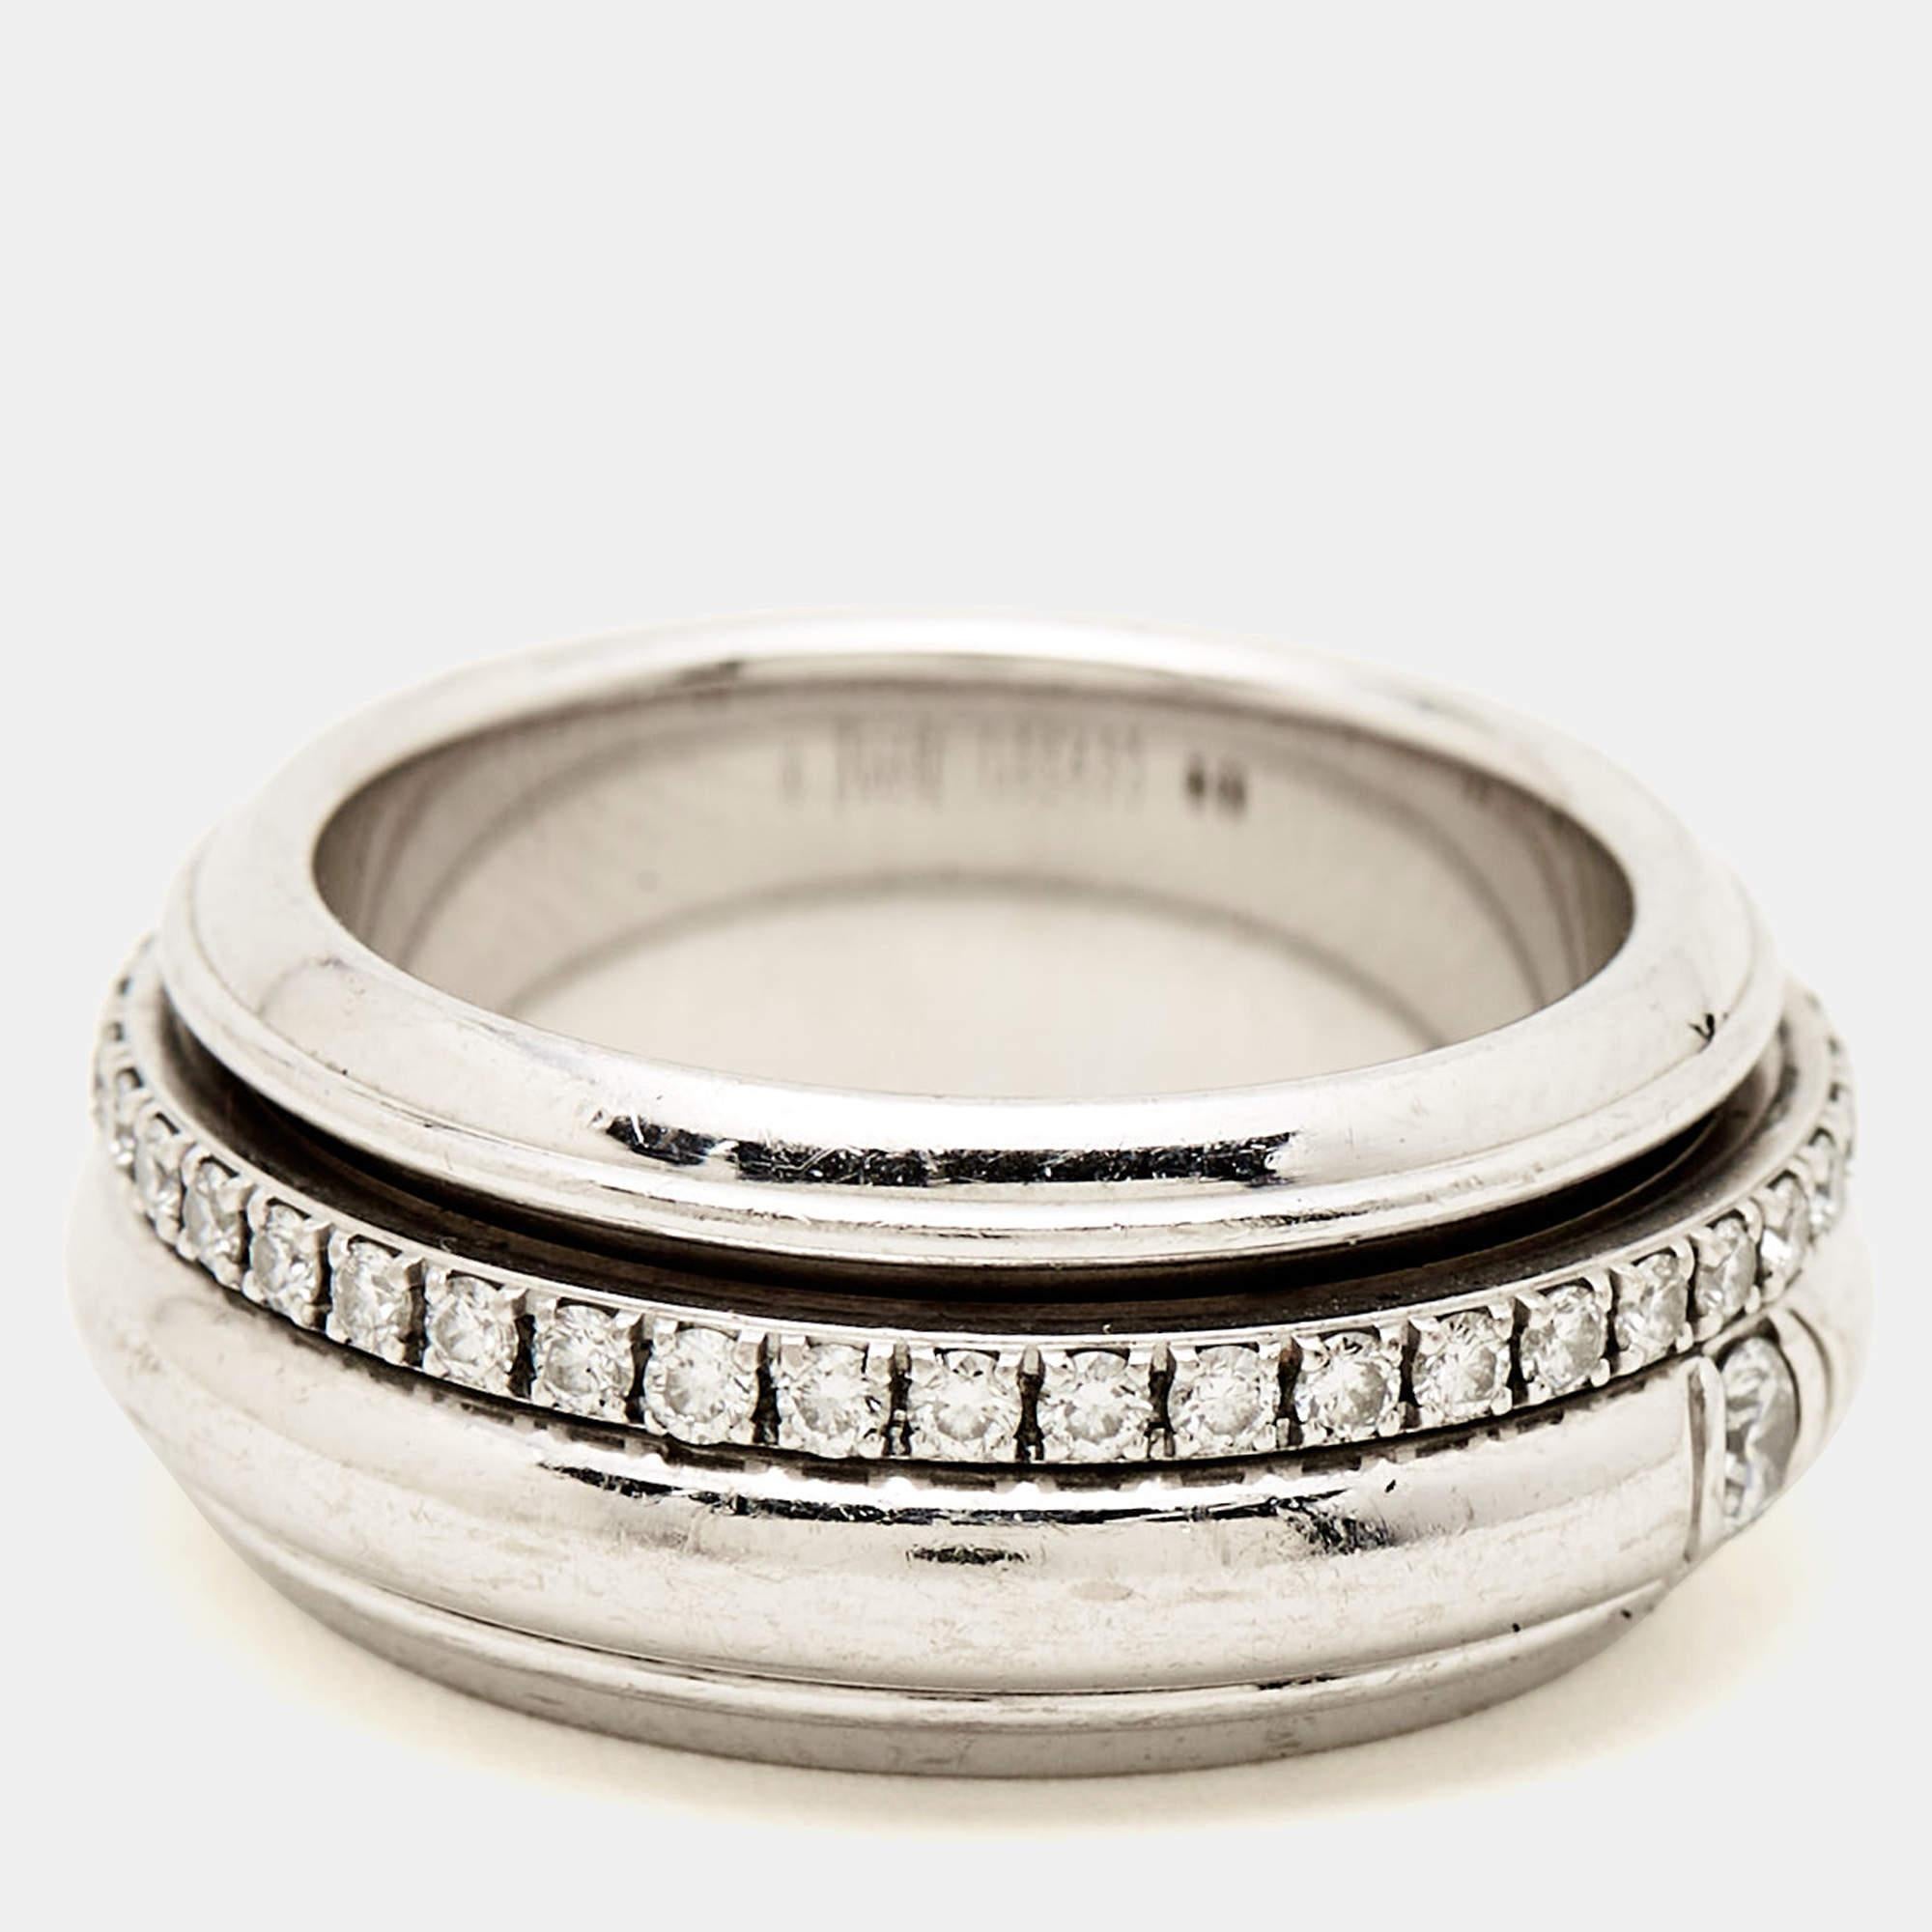 Show your love for fine artistry and luxury accessories with this stunning creation from Piaget that is made from 18k white gold. One of their most popular collections from Piaget is their Possession collection which is defined by rotating rings. We